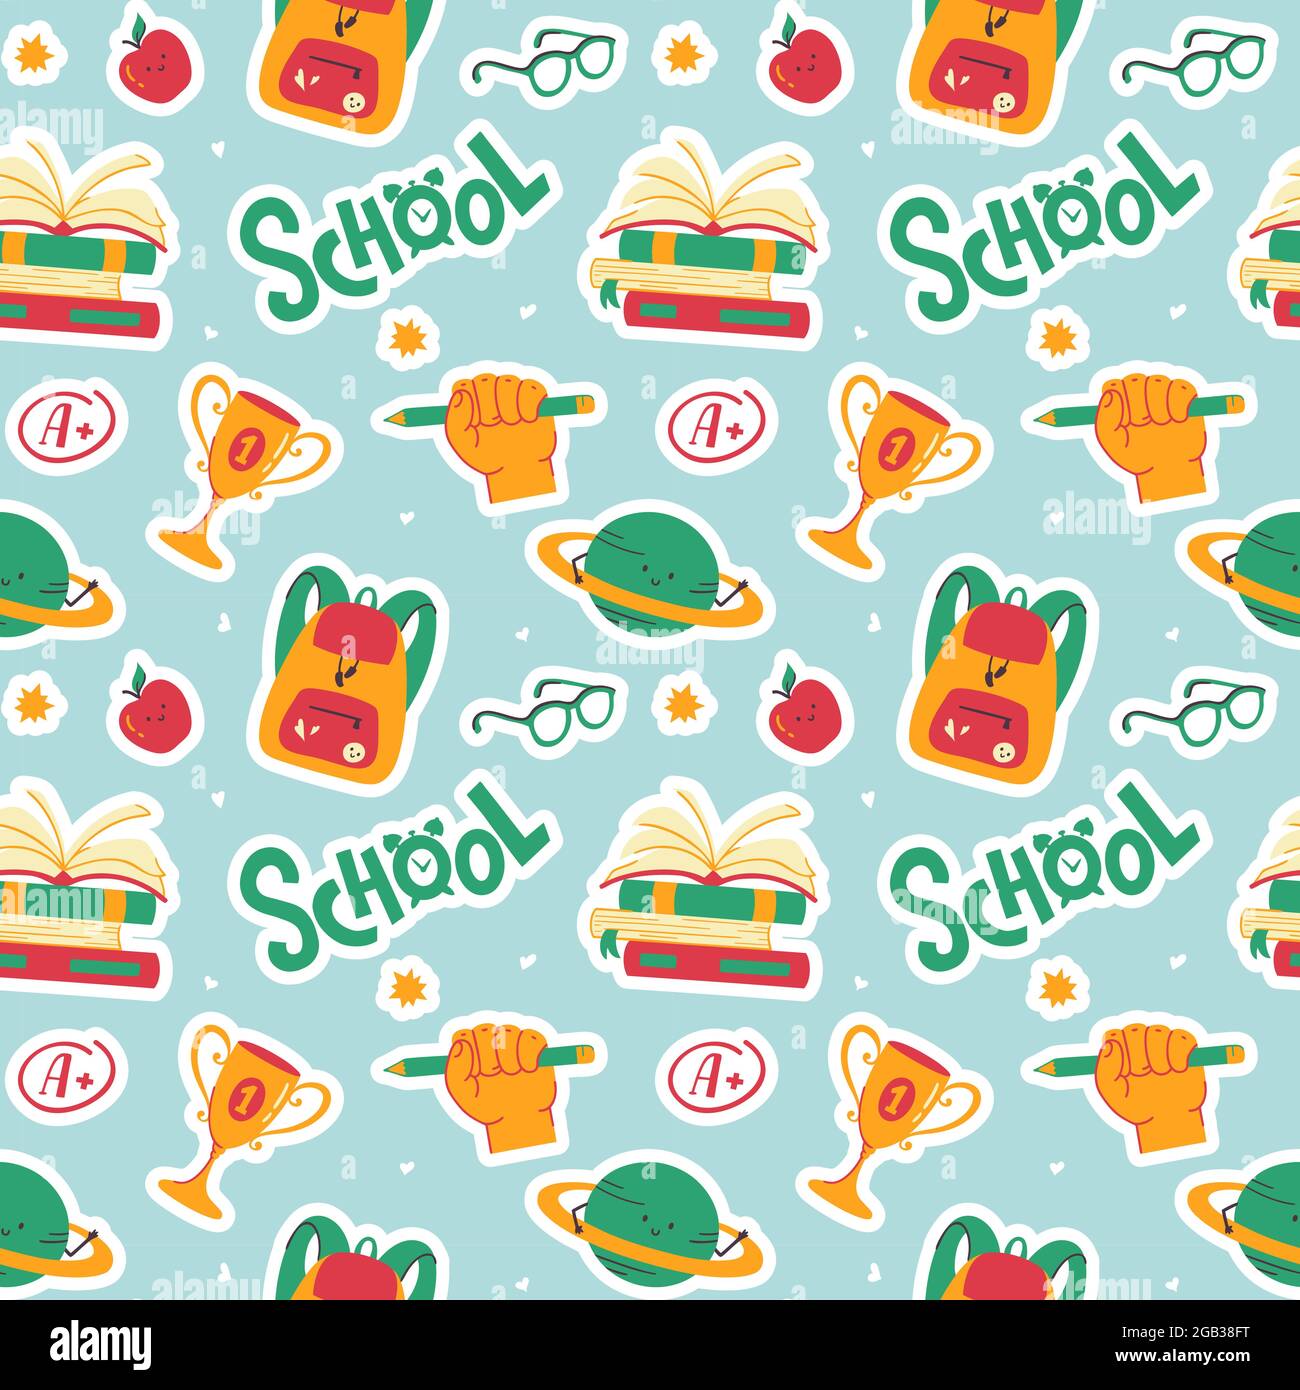 School seamless pattern with books, backpacks, planets, apples, glasses and hand letterings. Funny vector background. Stock Vector